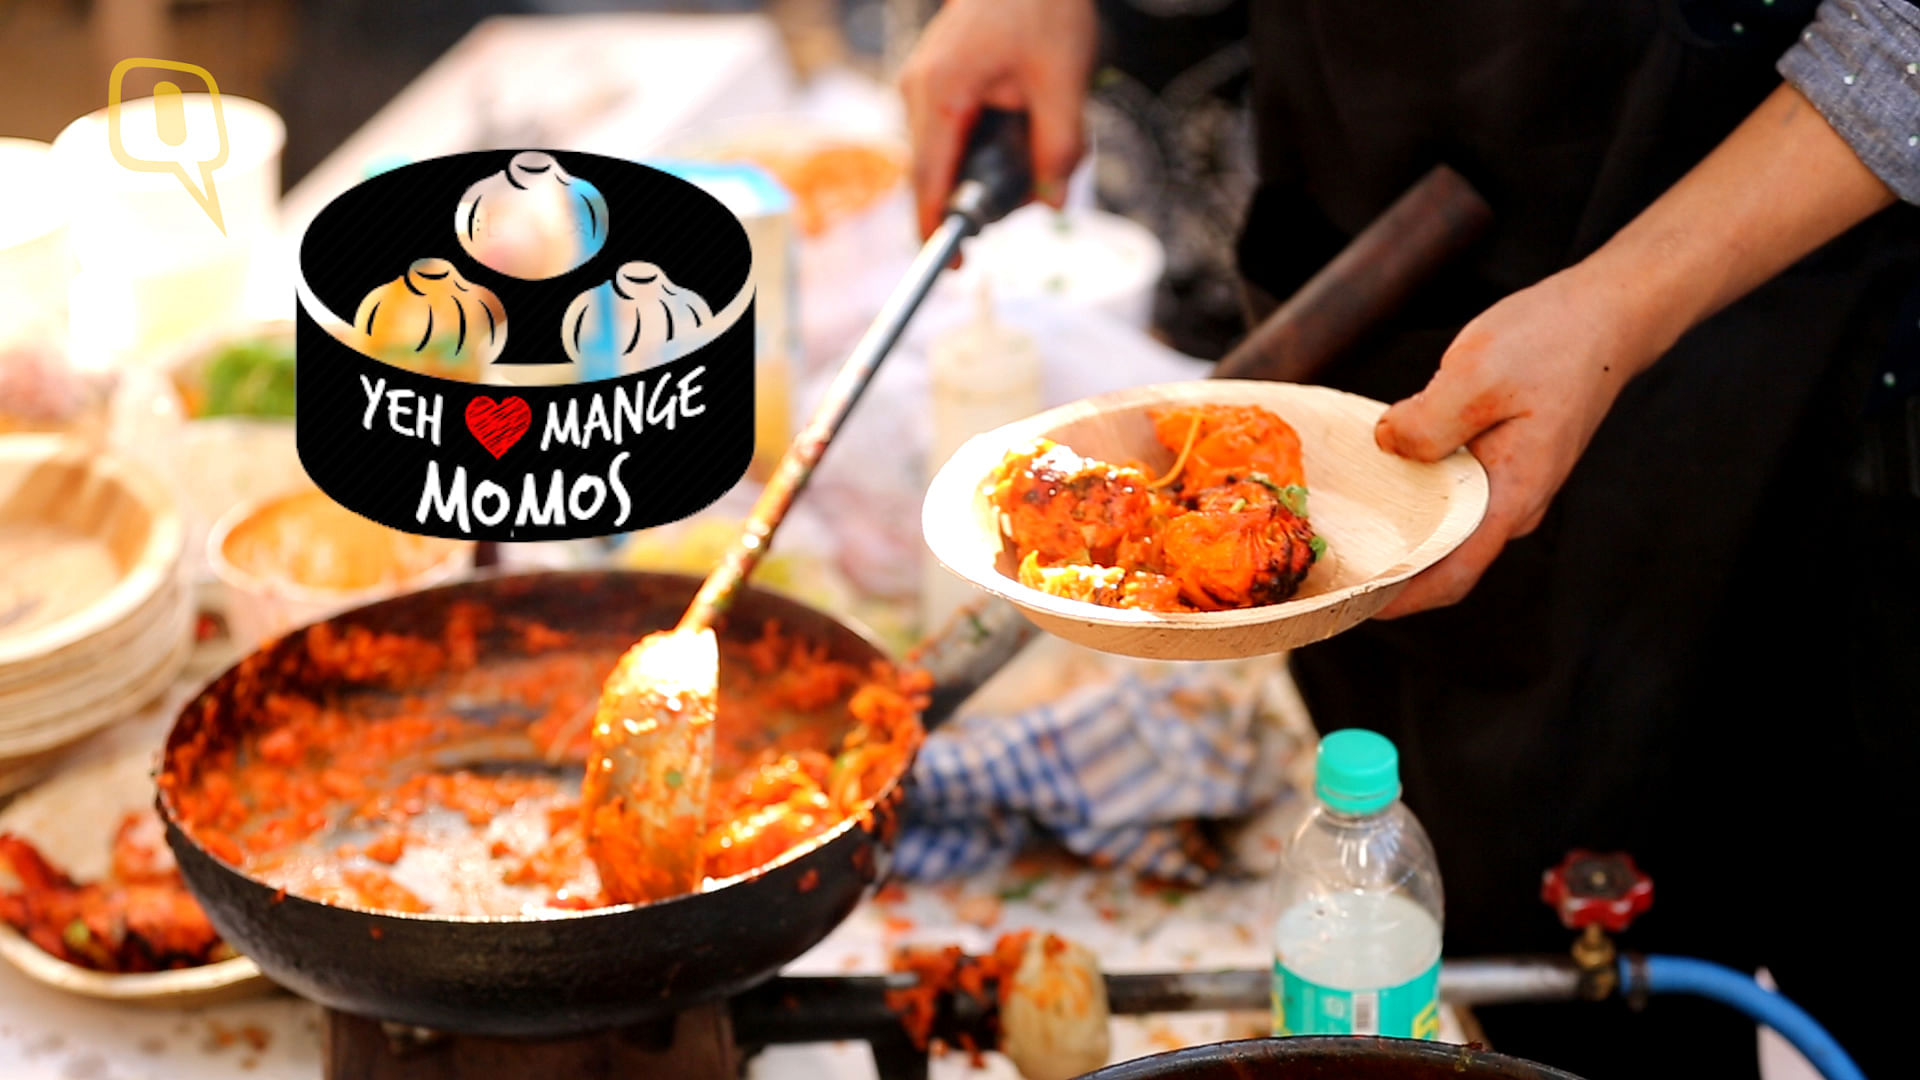 ‘Yeh Dil Mange Momos’ Delhi’s first festival exclusively for Momo lovers. <i>(Photo:The Quint)</i>